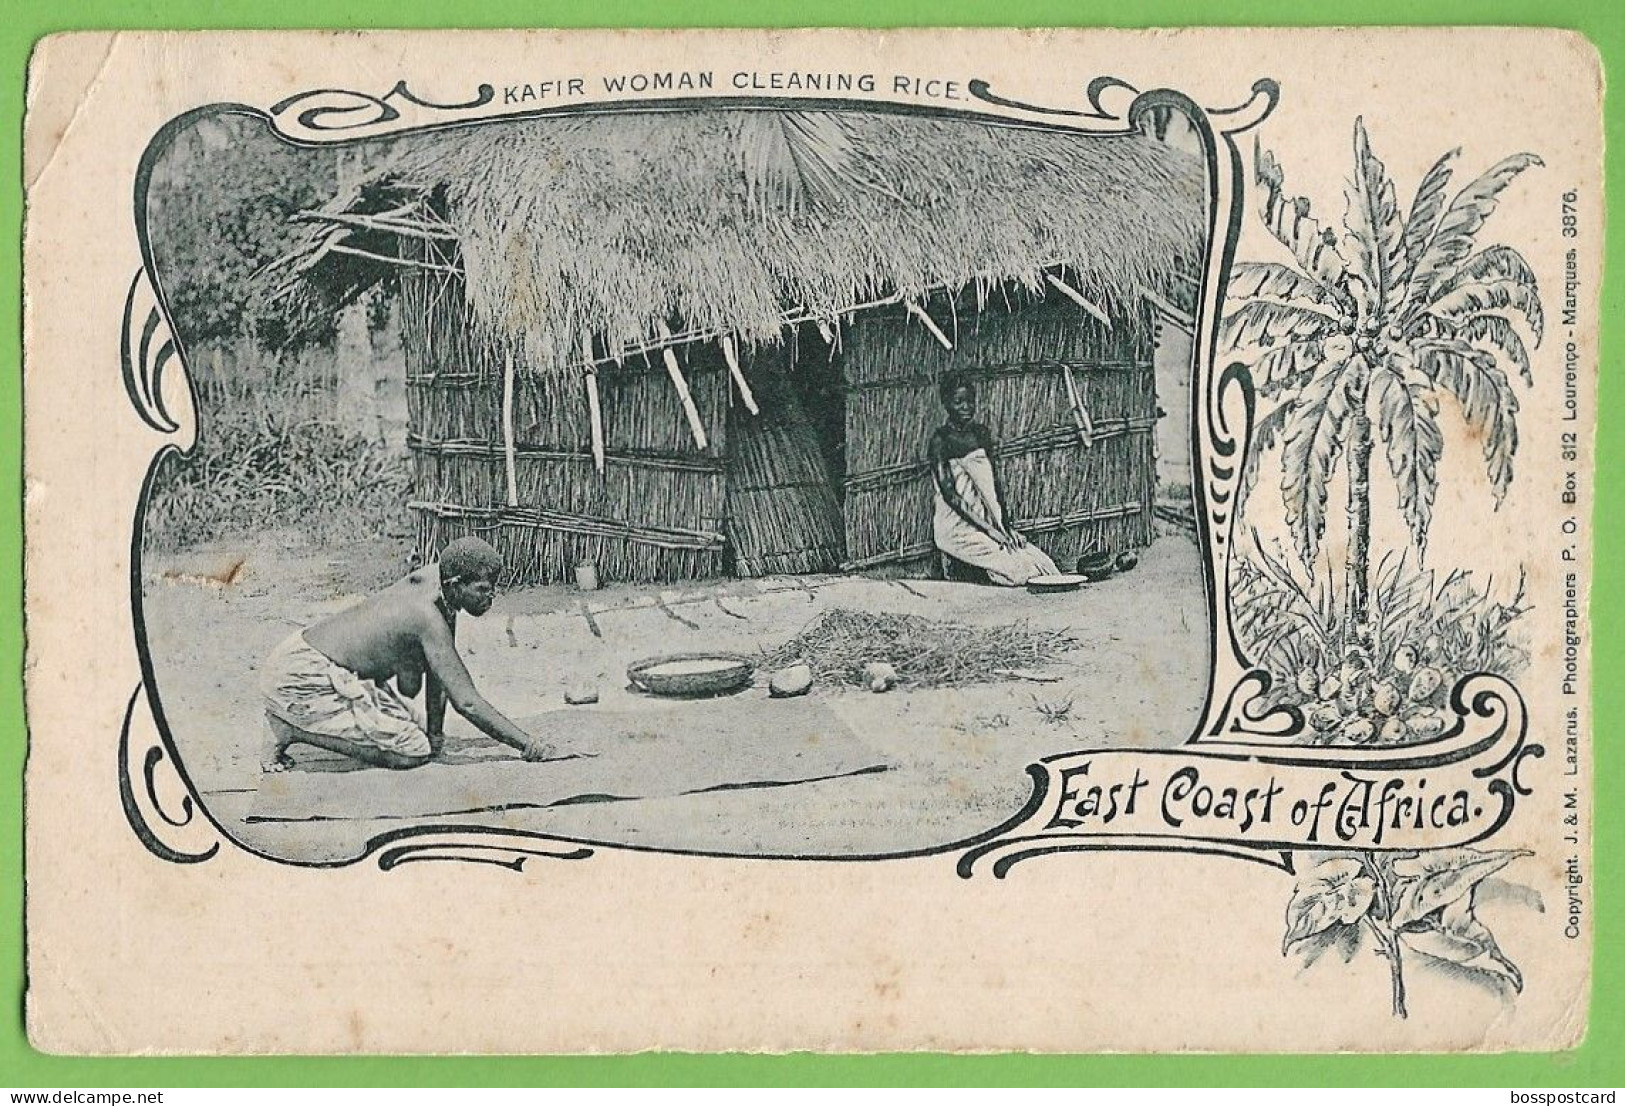 Moçambique - Kafir Woman Cleaning Rice - East Coast Africa - Nu - Nude - Ethnic - Ethnique - Portugal - Mozambique